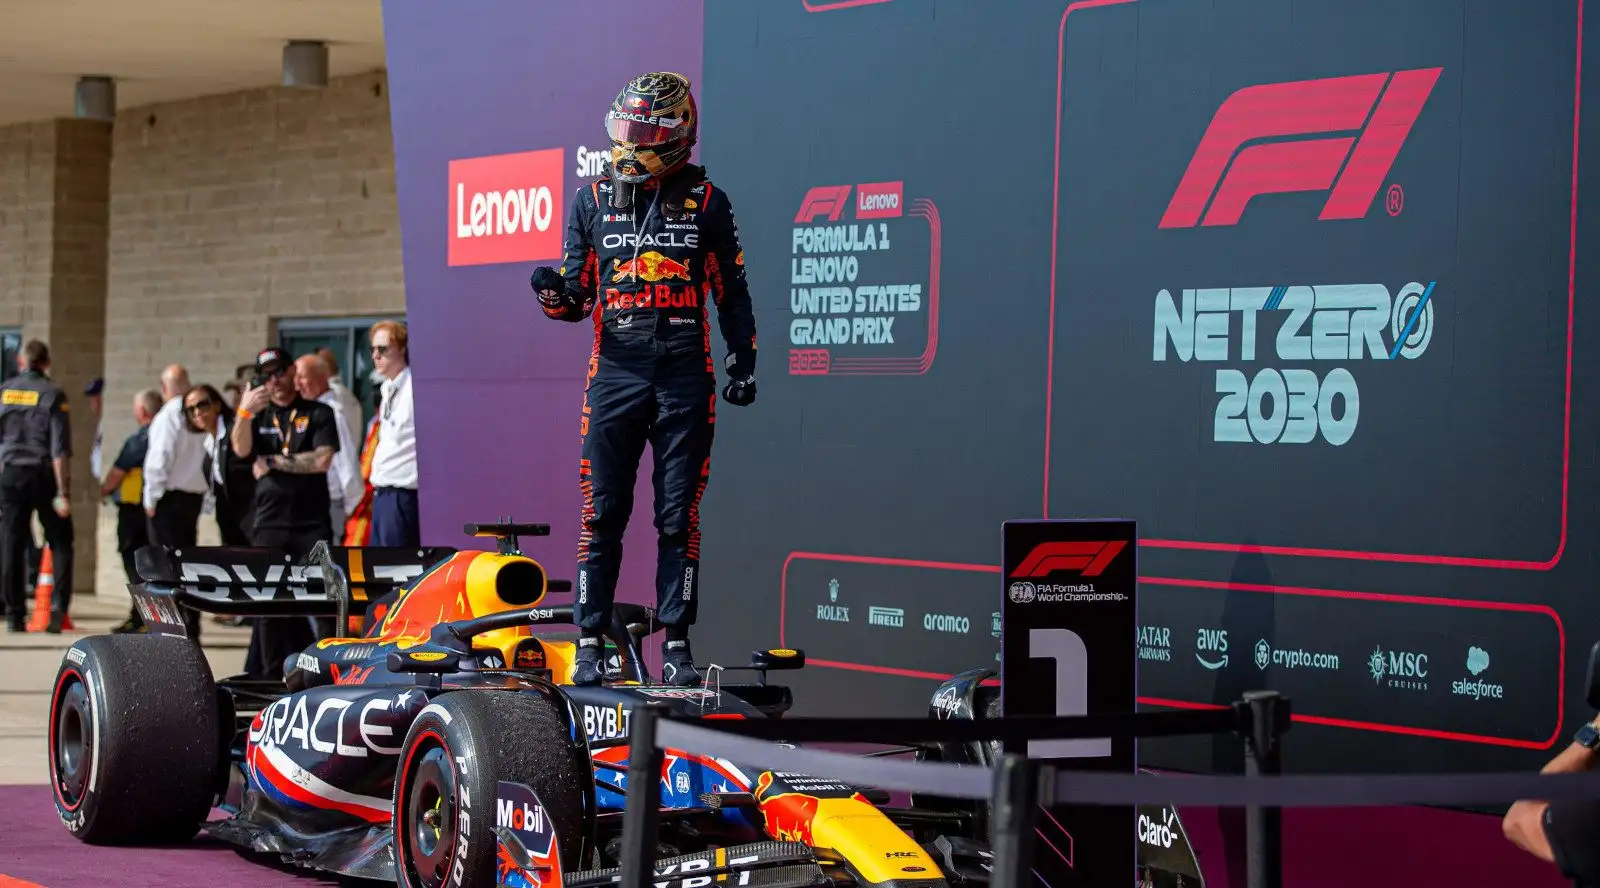 Red Bull driver Max Verstappen stands on his RB19 to celebrate after winning the United States GP.